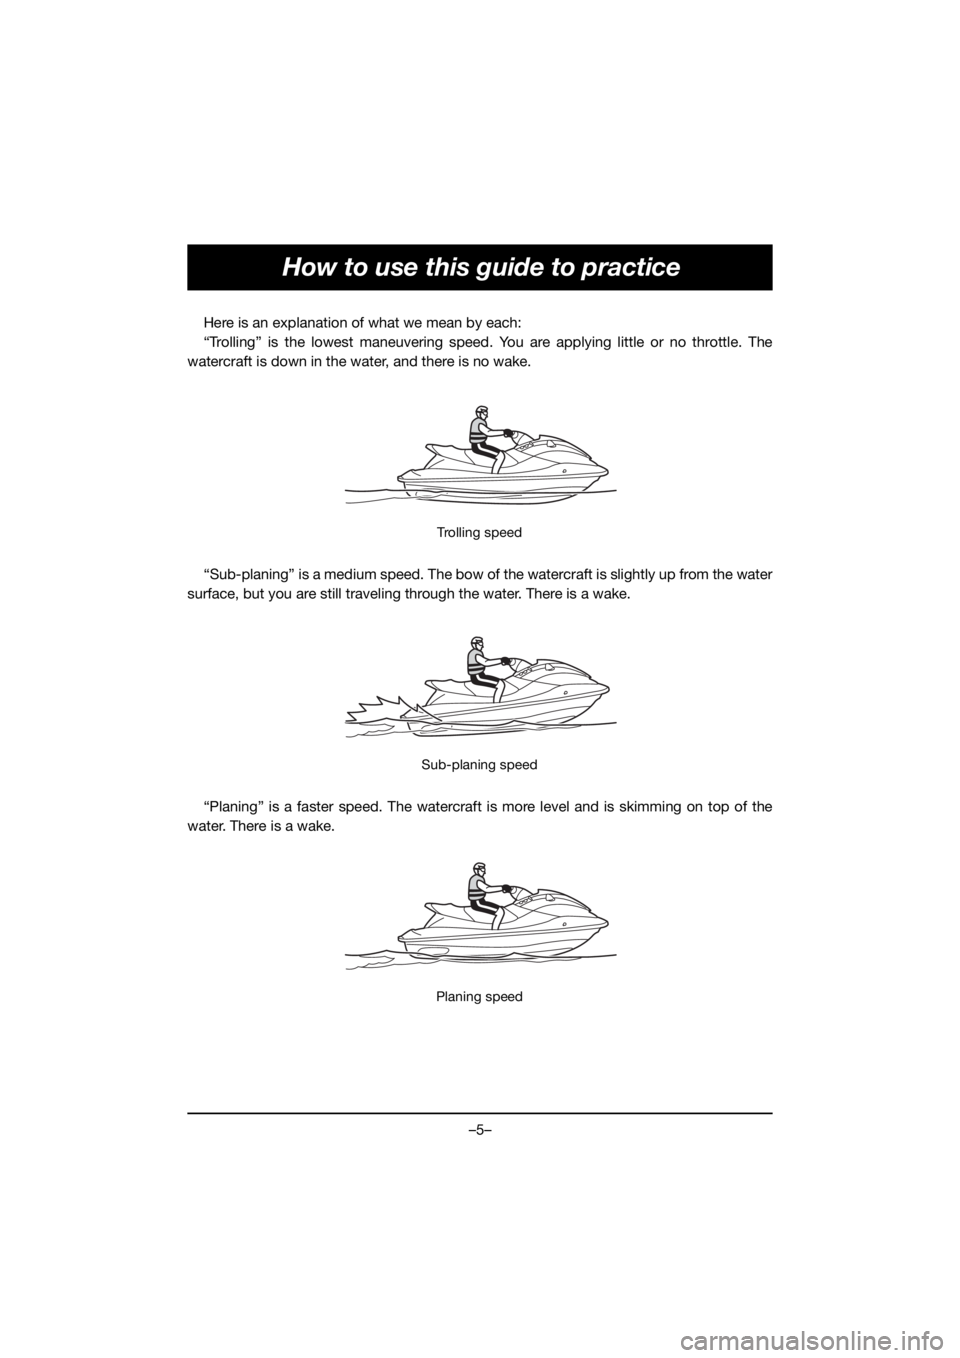 YAMAHA GP1800R SVHO 2020  Notices Demploi (in French) –5–
How to use this guide to practice
Here is an explanation of what we mean by each:
“Trolling” is the lowest maneuvering speed. You are applying little or no throttle. The
watercraft is down